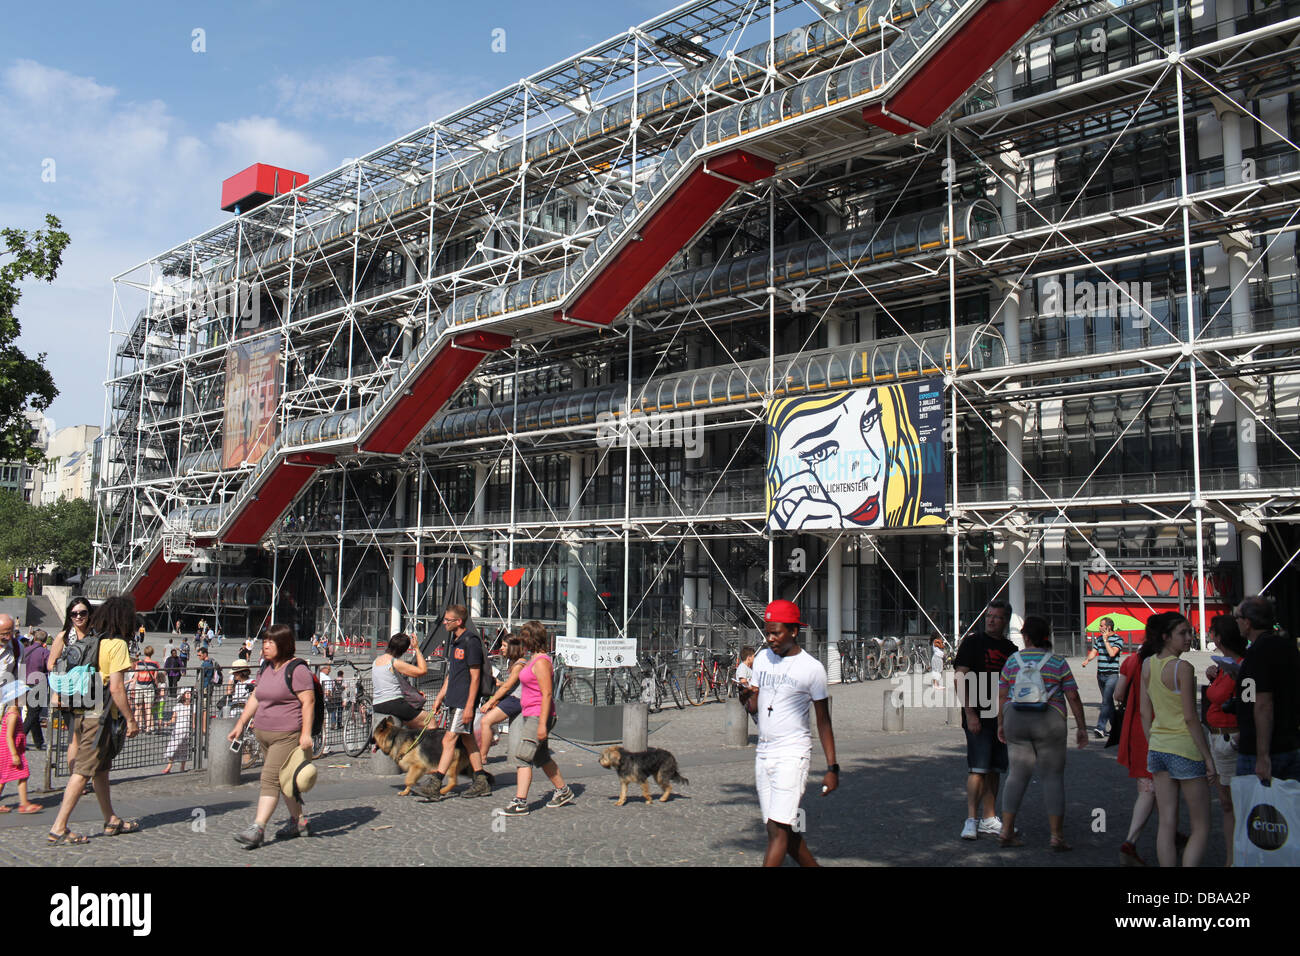 Crowds in front of the west side of the Pompidou Centre, art gallery in Paris. A large Andy Warhol pop-art poster is seen Stock Photo